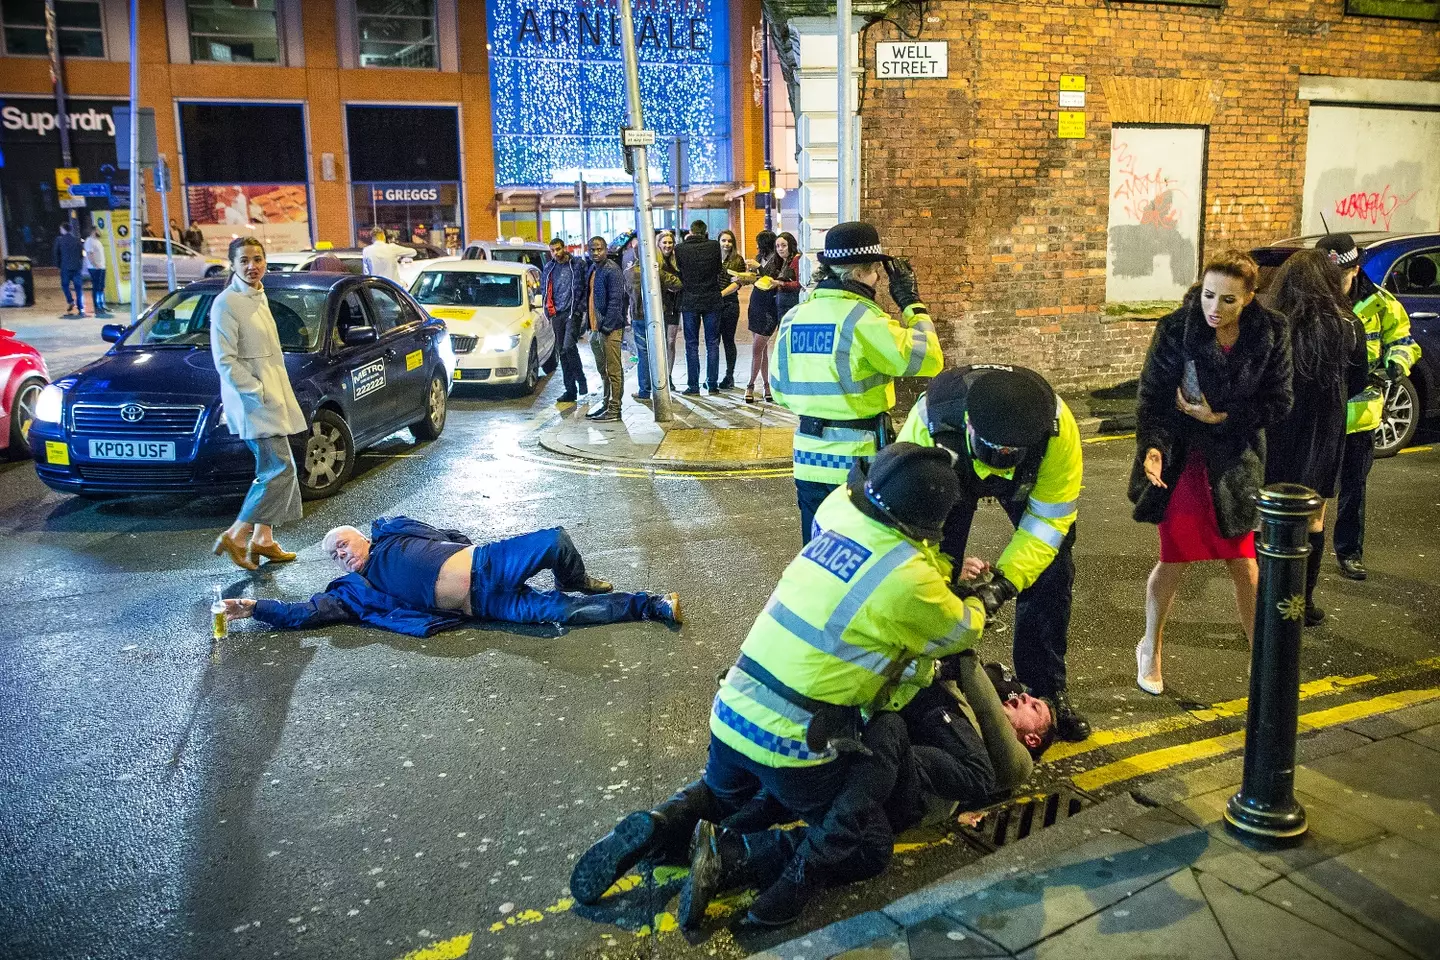 Joel's OG photo, taken on Well Street, also depicted the chaos of New Year's Eve.